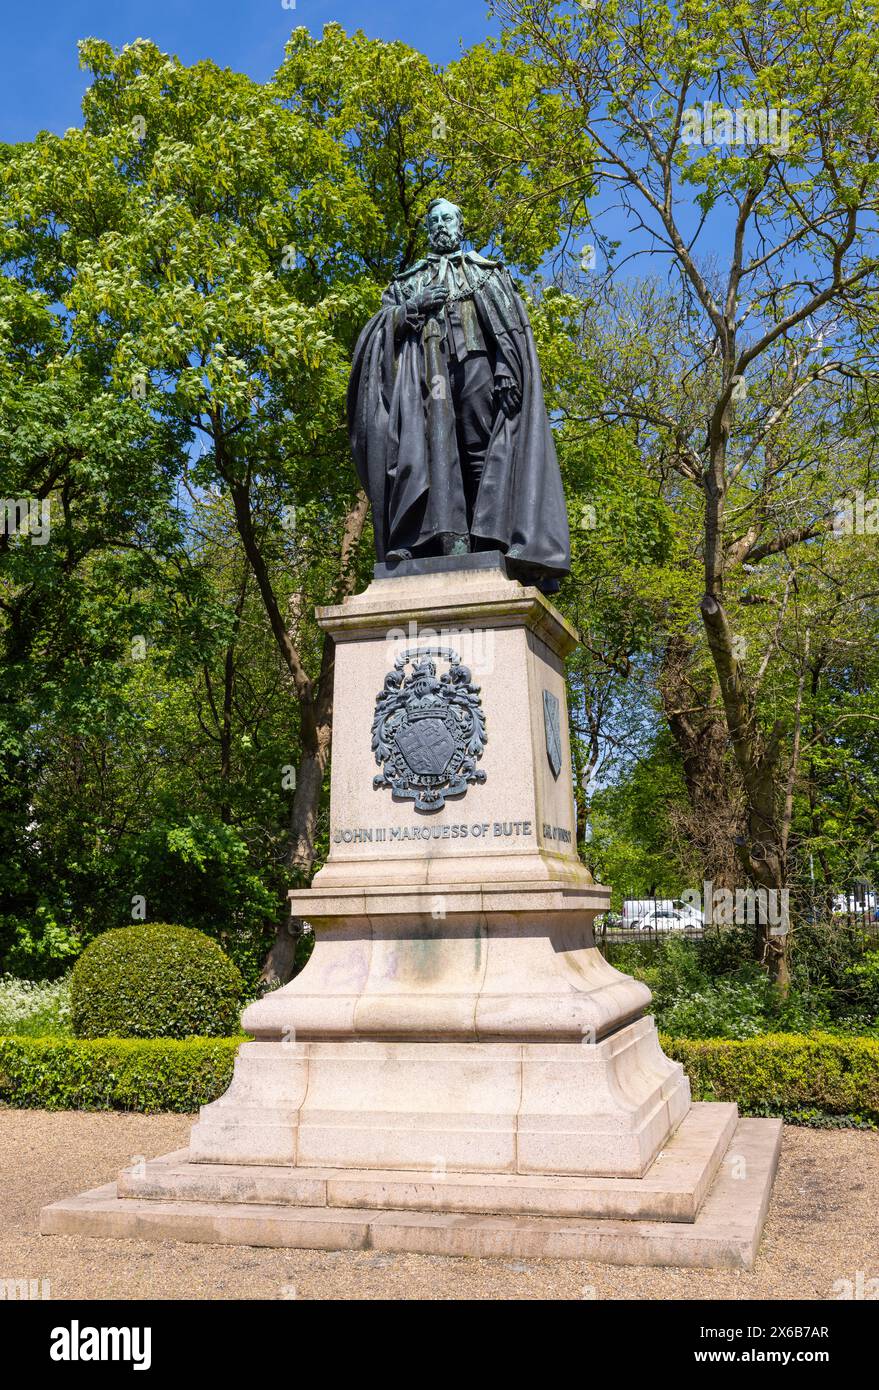 Statue des Marquess of Bute in Friary Gardens, Cardiff Stadtzentrum, Wales Stockfoto